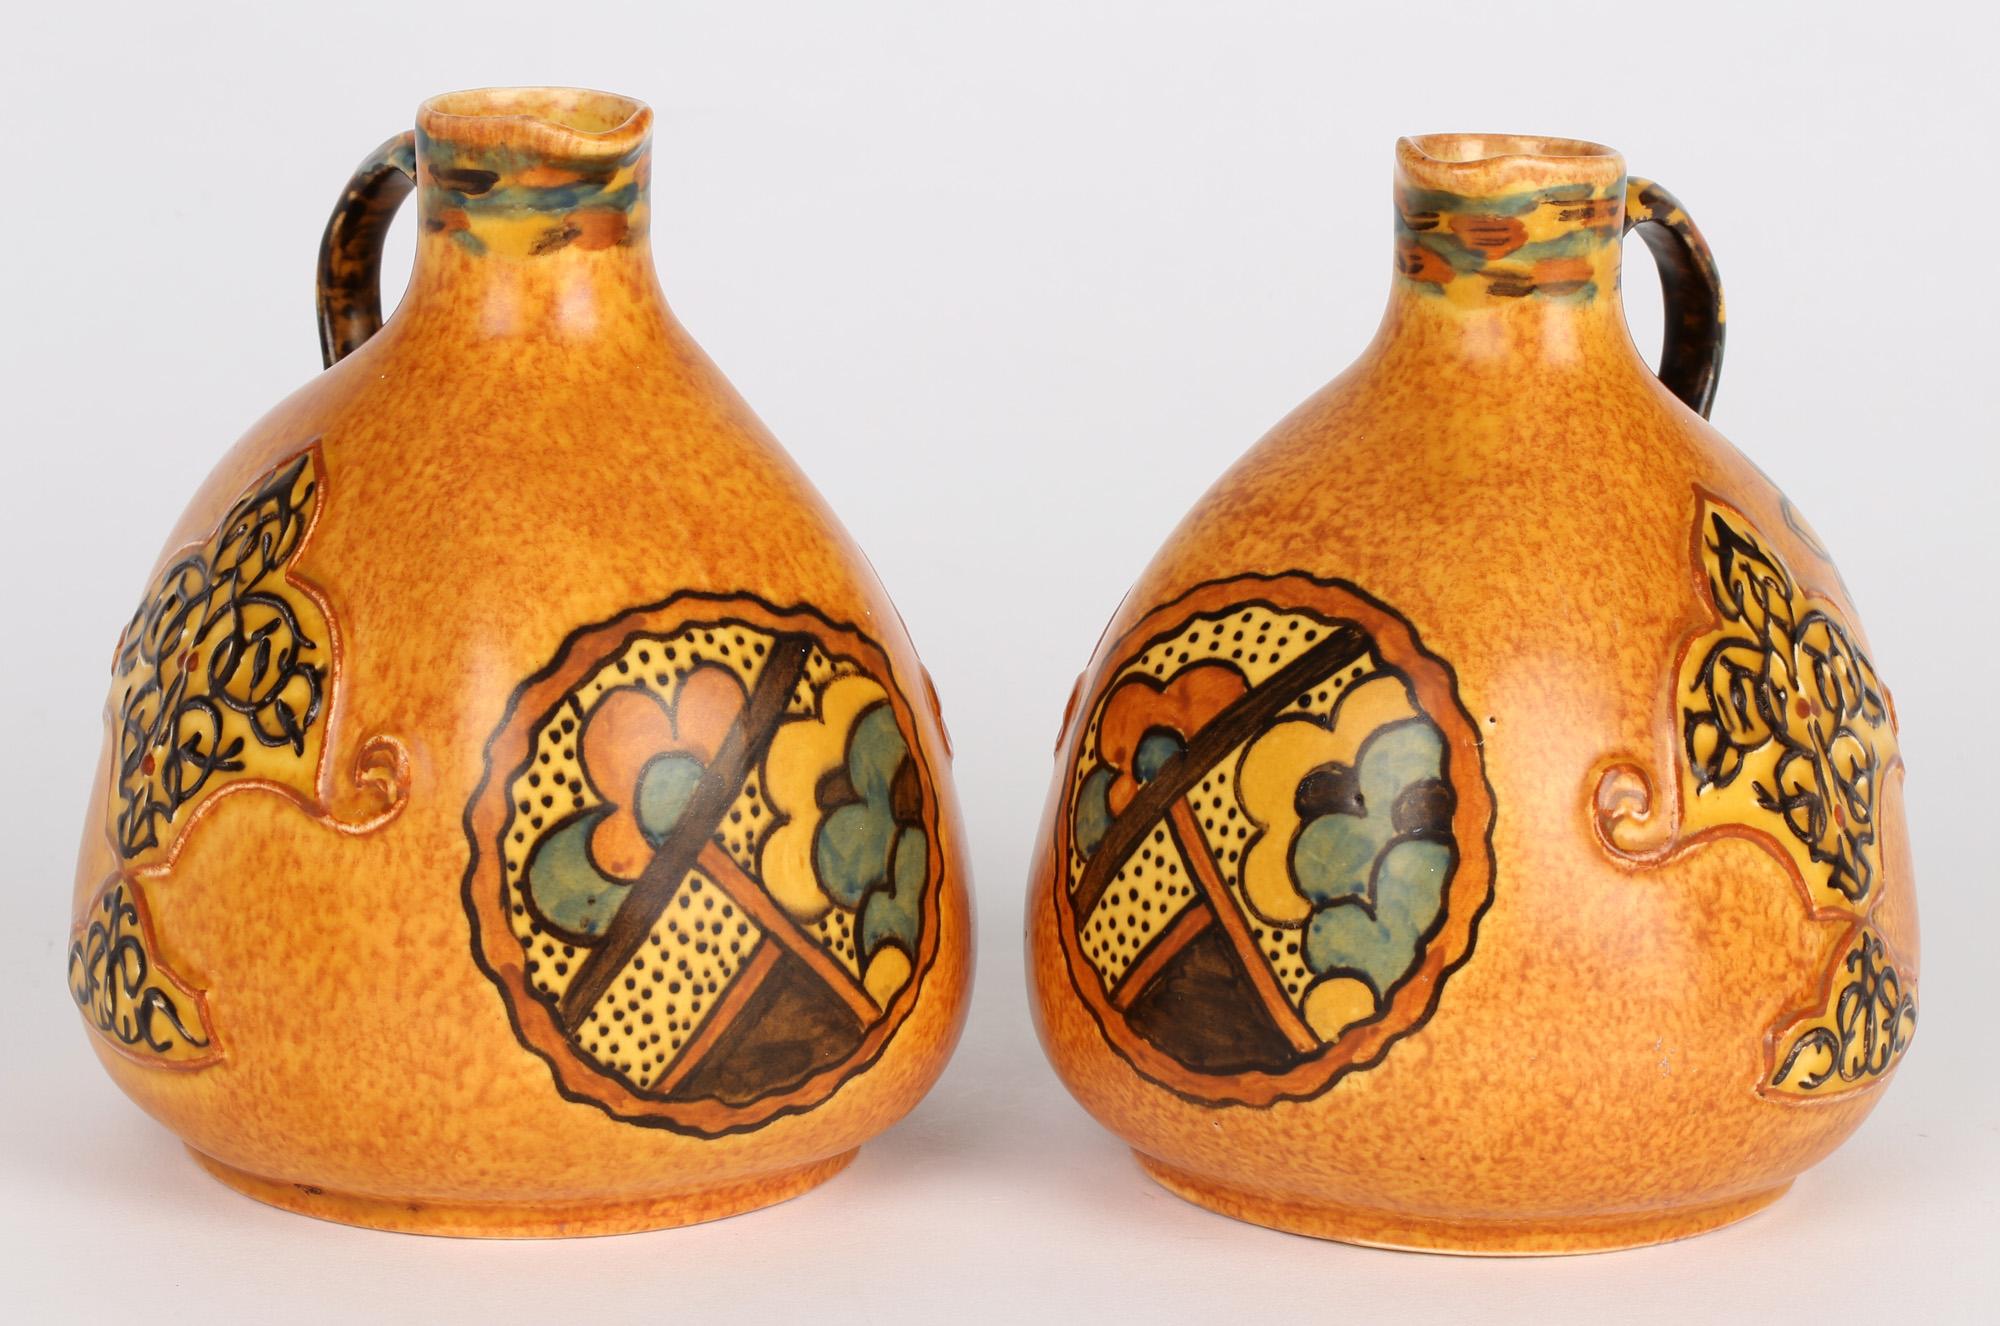 George Clews Tunstall Pair Chameleon Ware Art Deco Persian Pottery Jugs For Sale 3